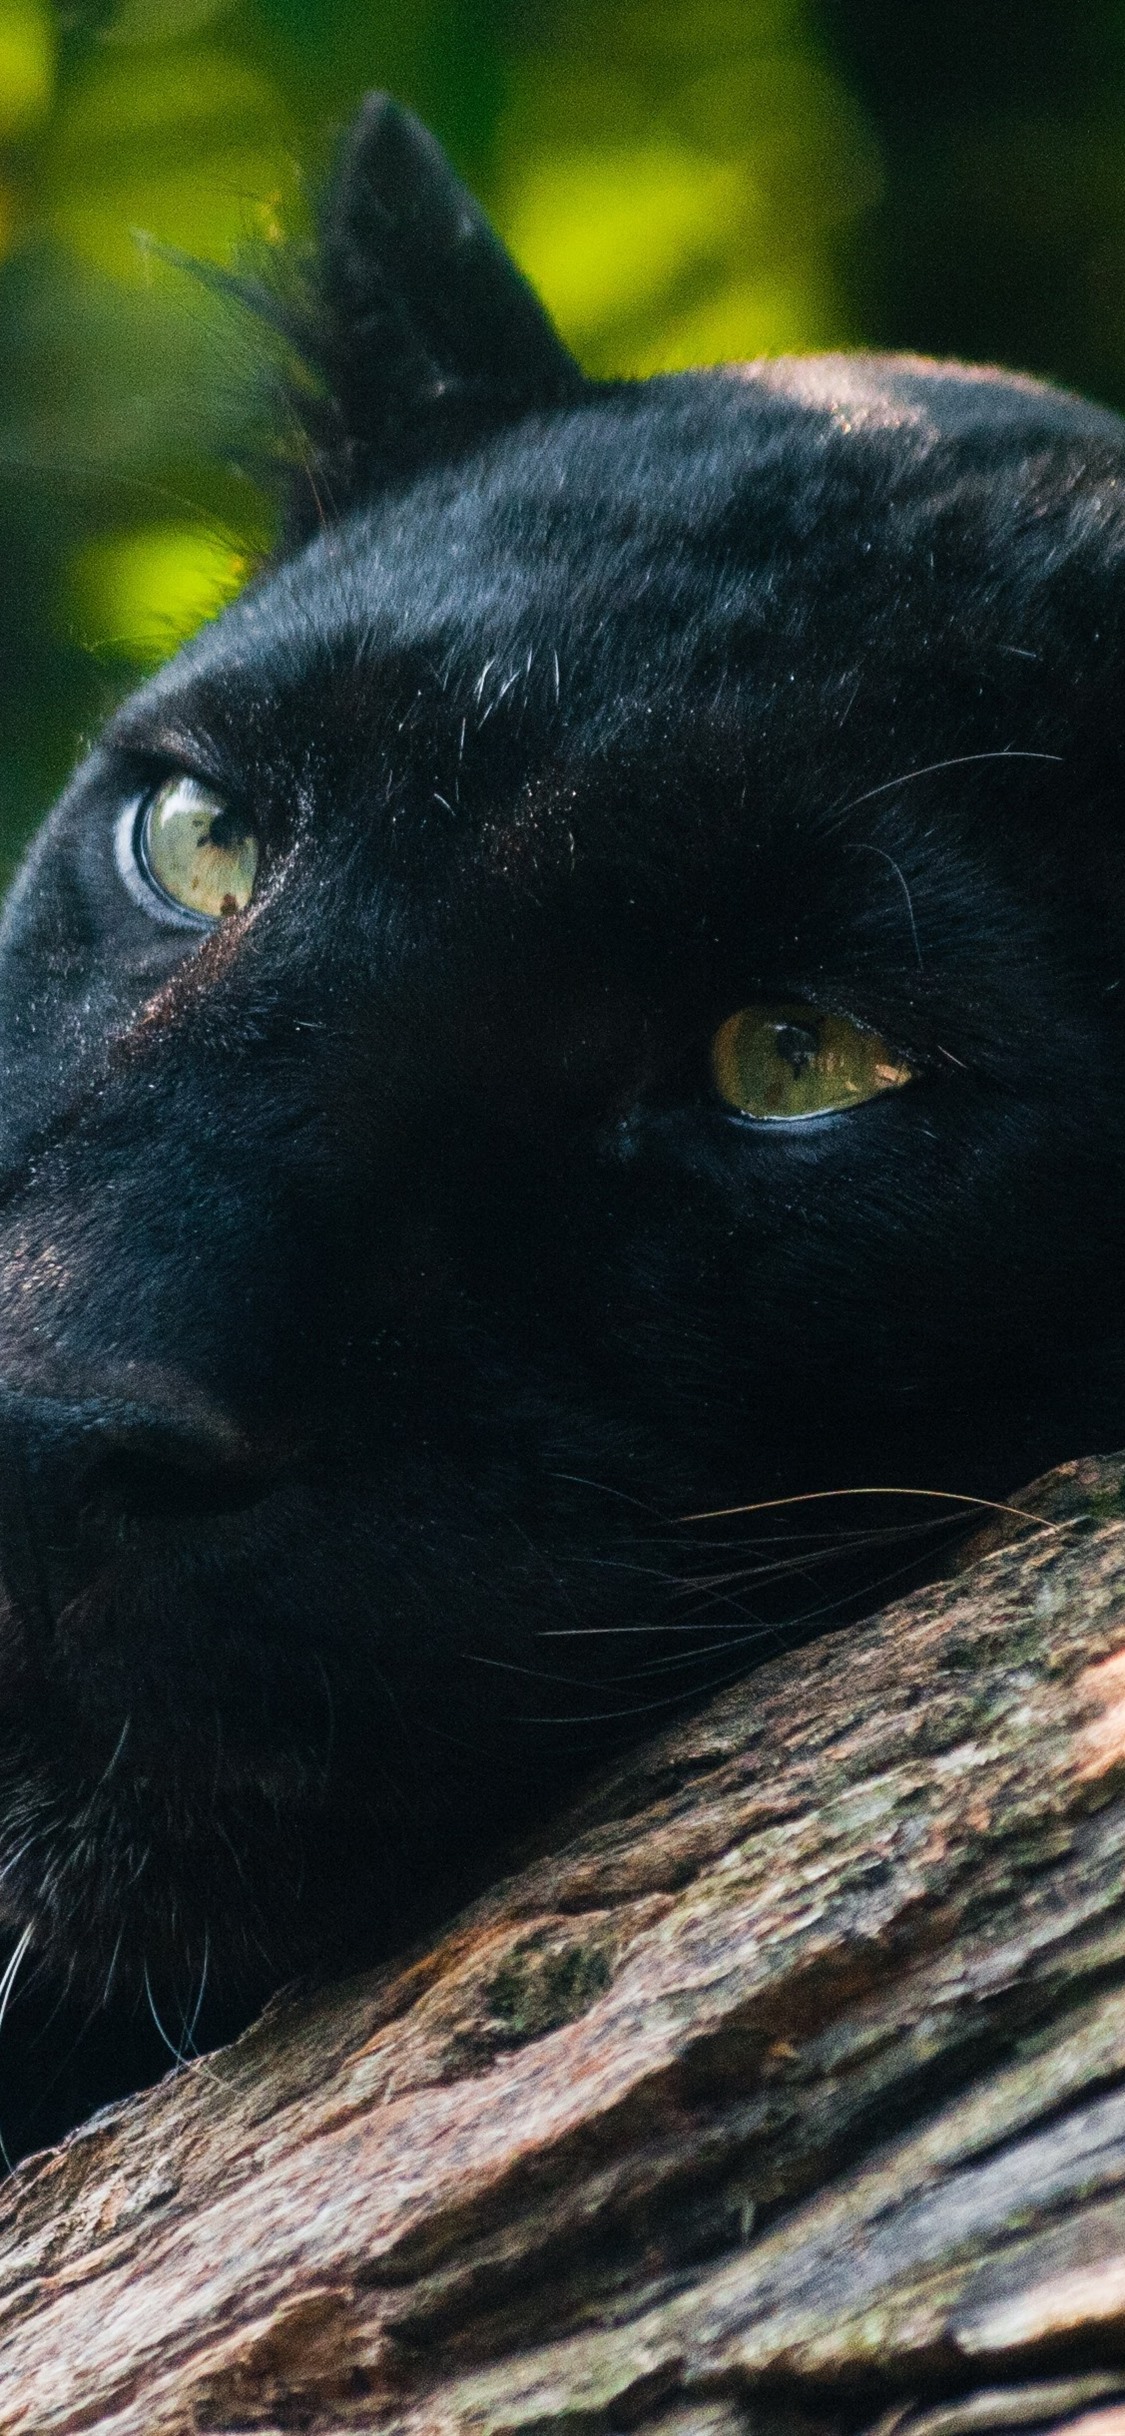 Iphone Wallpaper Panther, Predator, Rest, Yellow Eyes - Animal Black Panther  Wallpapers For Iphone - 1125x2436 Wallpaper 